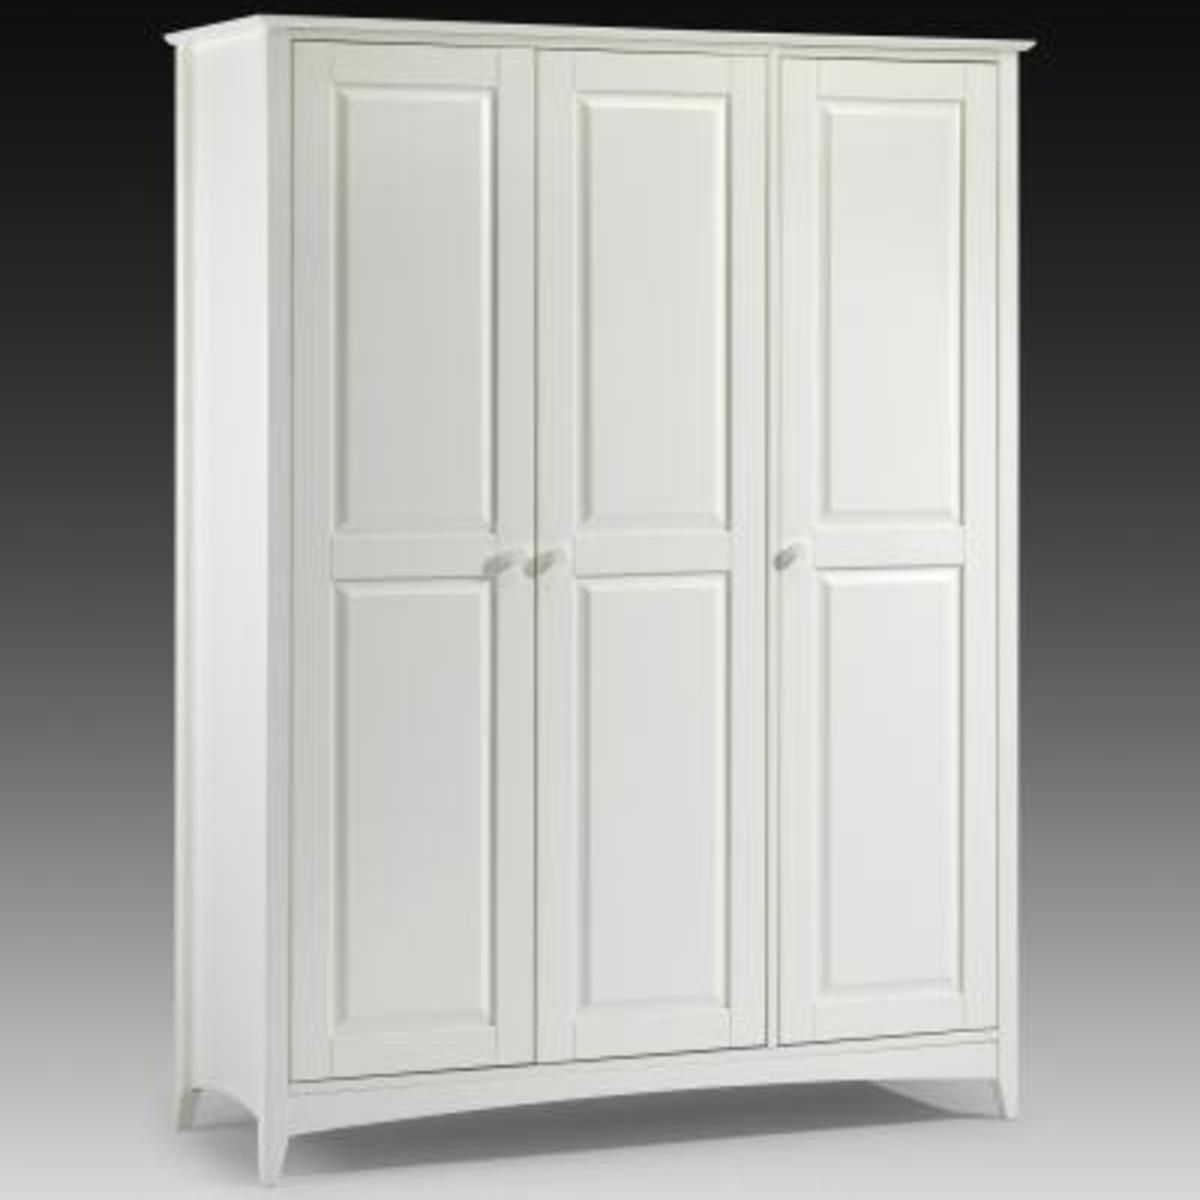 Affordable Wardrobe In White Lacquer |2 Door Wardrobe | Robinsons Beds Throughout White 3 Door Wardrobes (Photo 19 of 19)